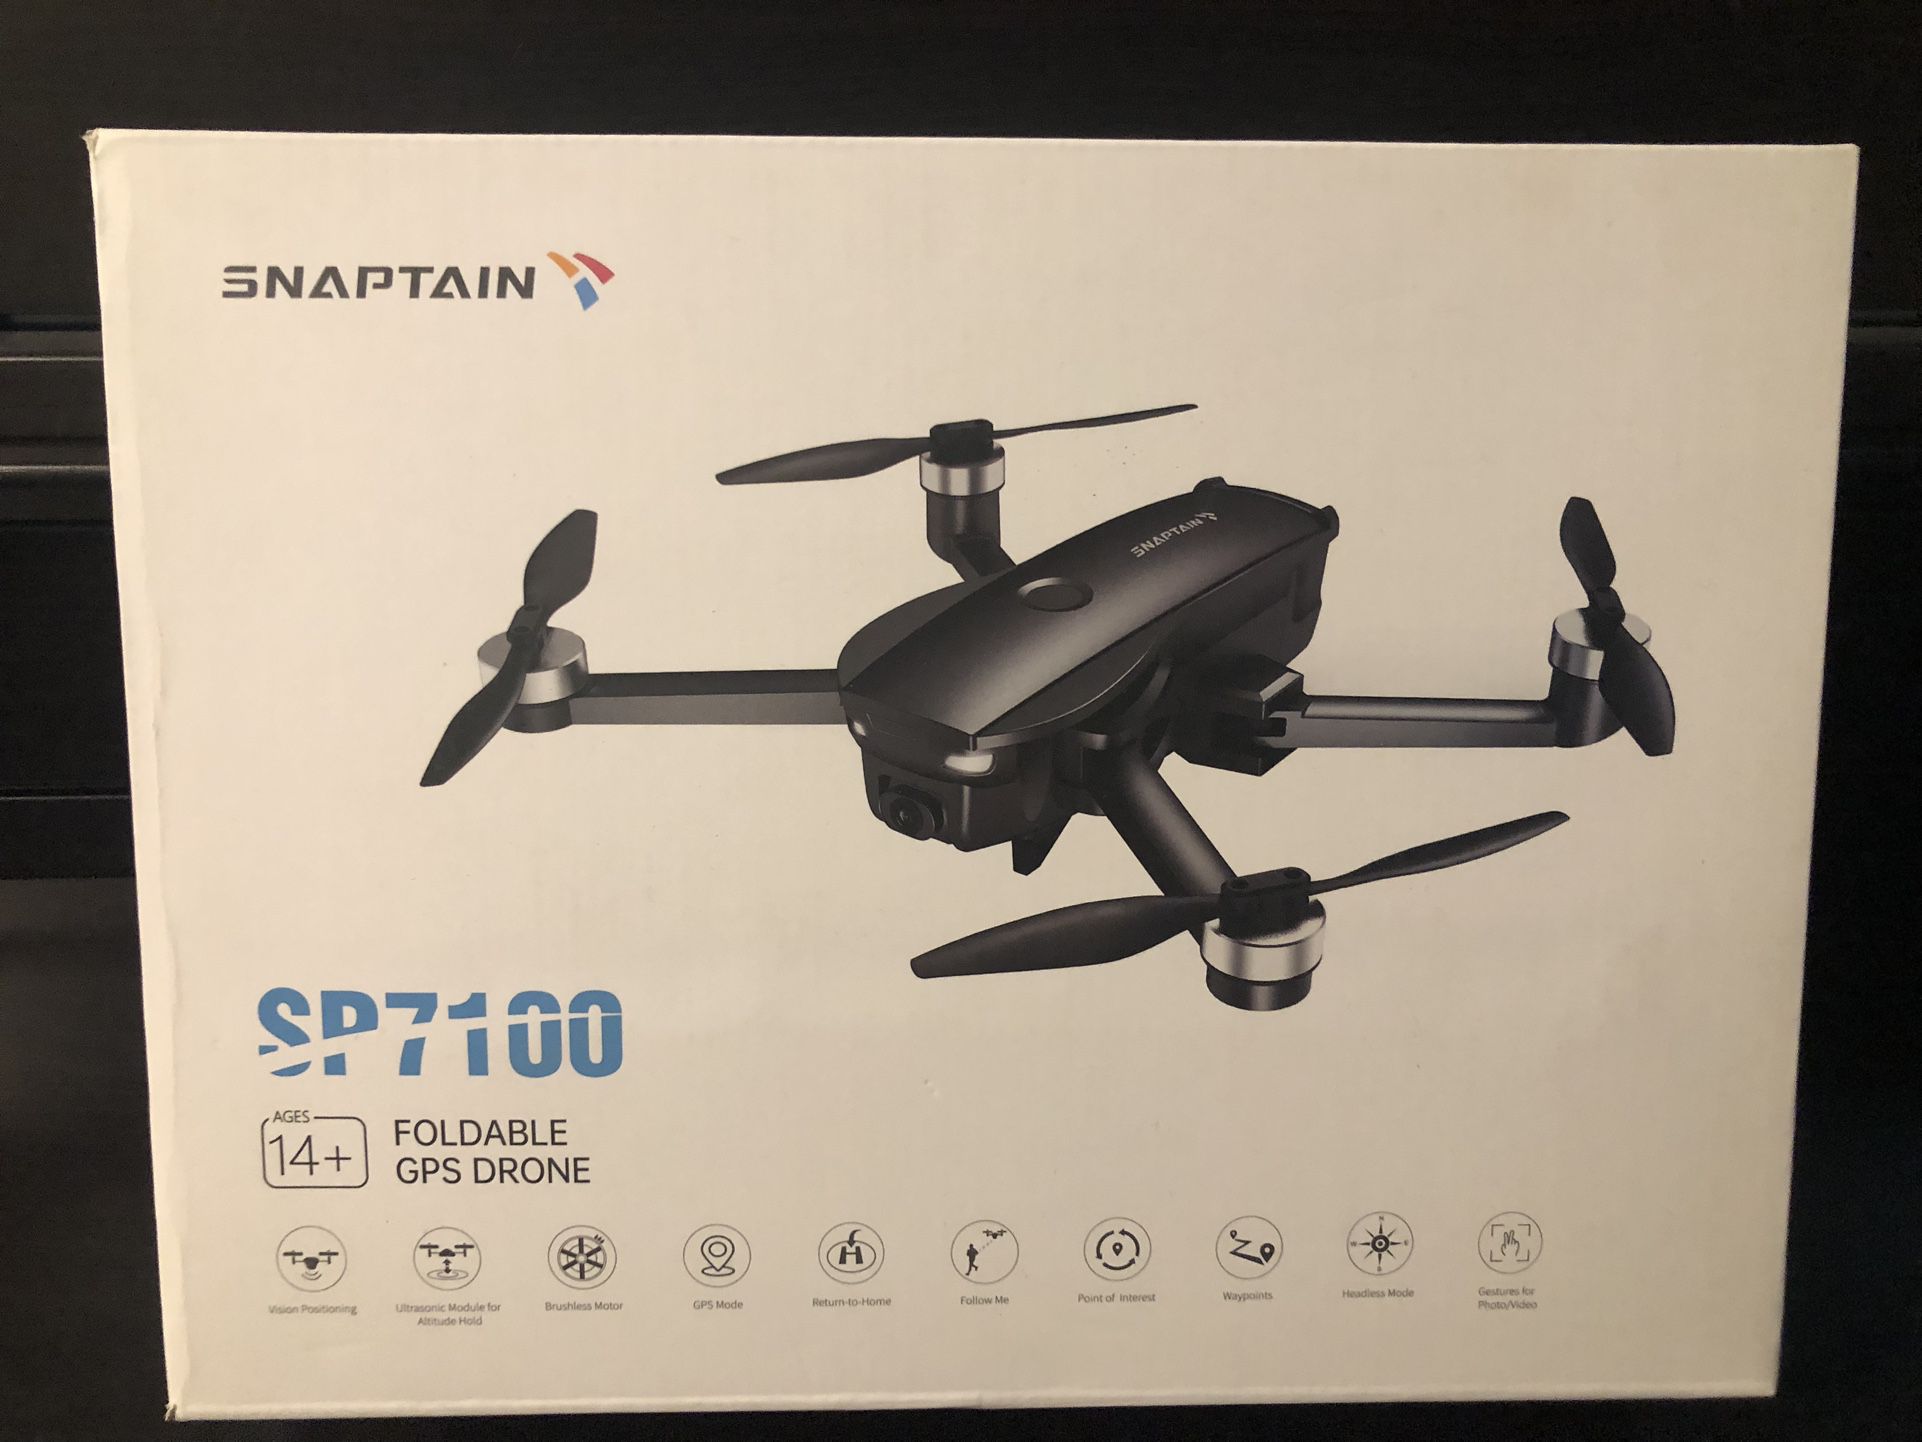 SNAPTAIN 7100 Drone